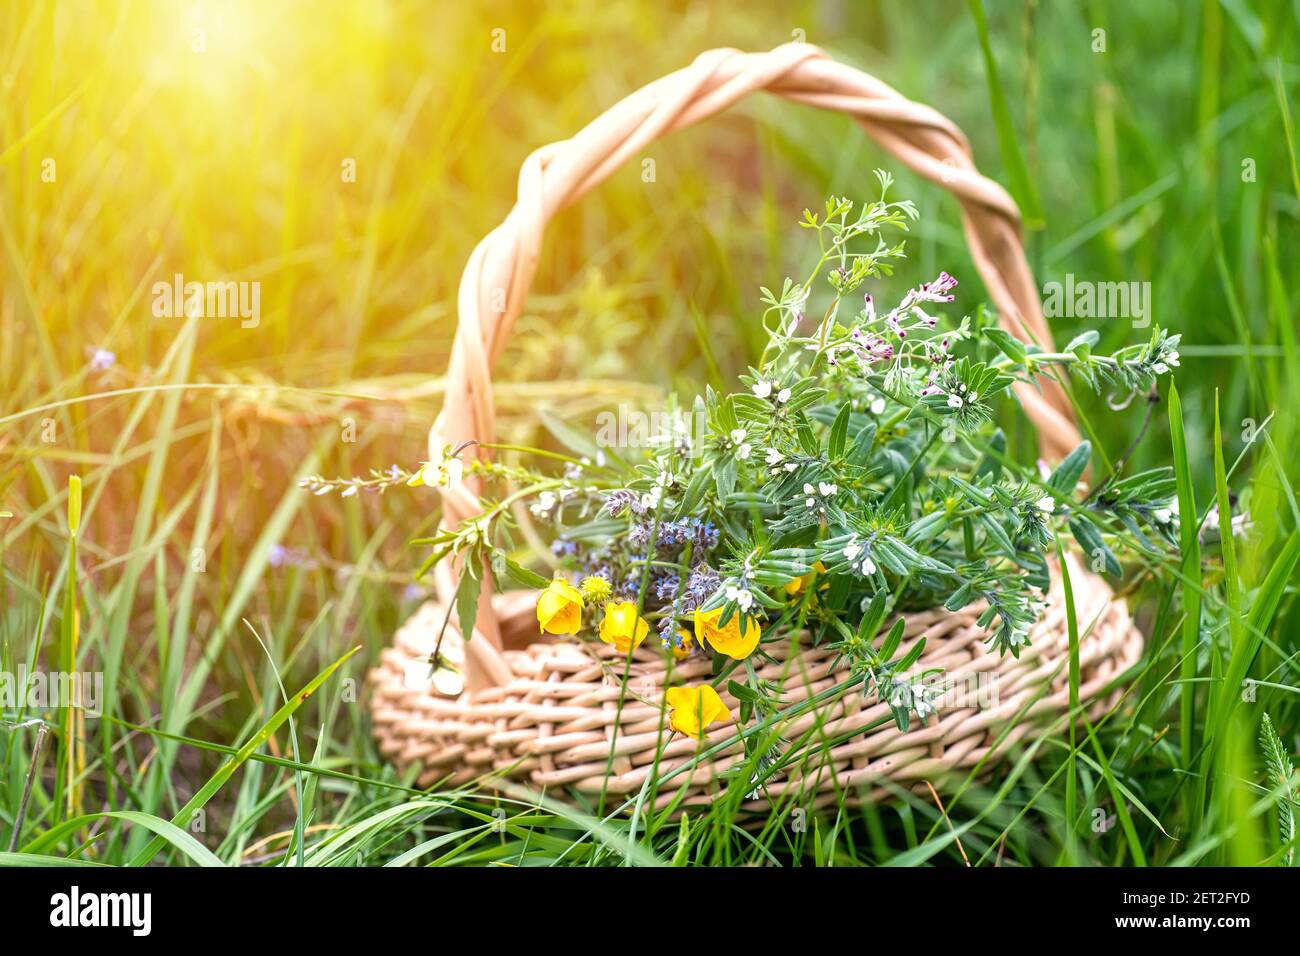 bouquet of medicinal plants in basket. Fumaria officinalis, Myosotis stricta, Ranunculus repens collected for the preparation of potions and infusions Stock Photo